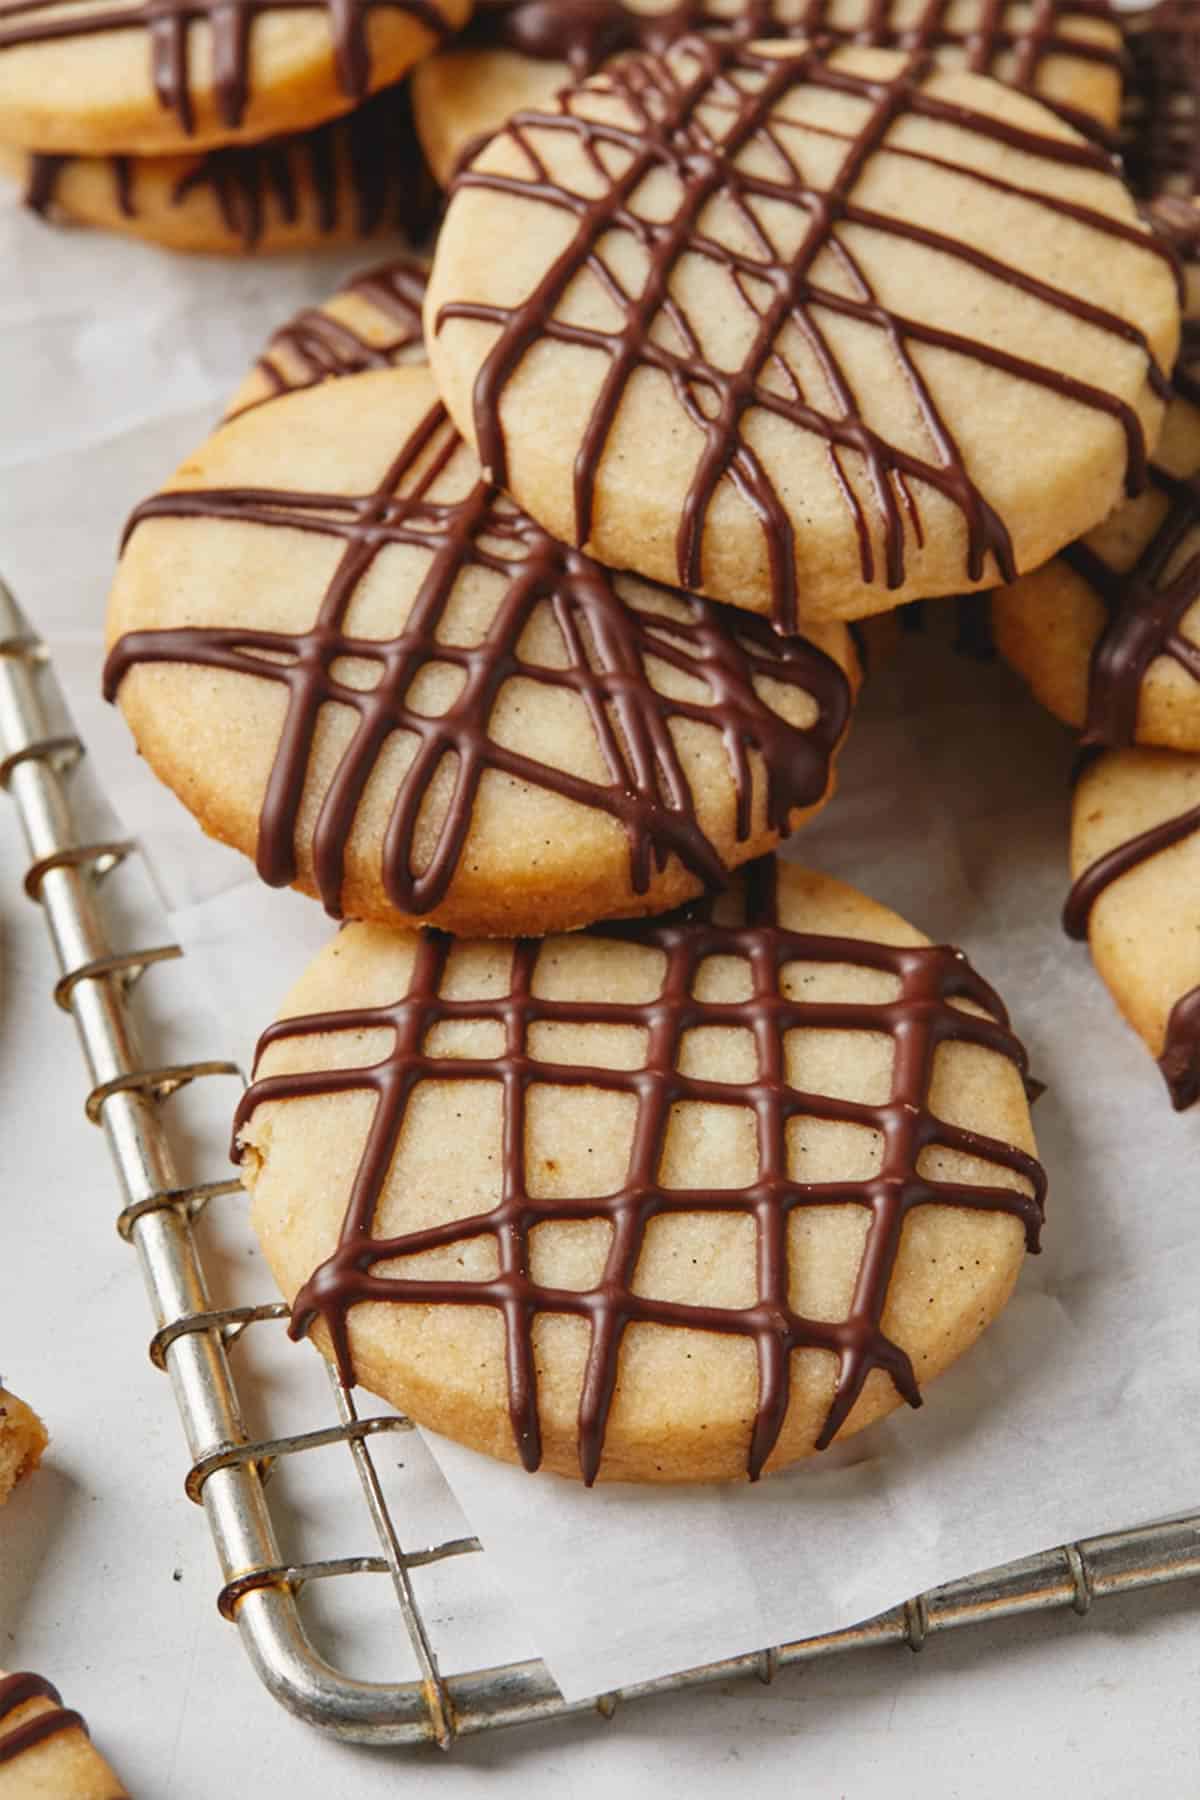 Chocolate drizzled shortbread cookies on a parchment lined wire rack against a white background.